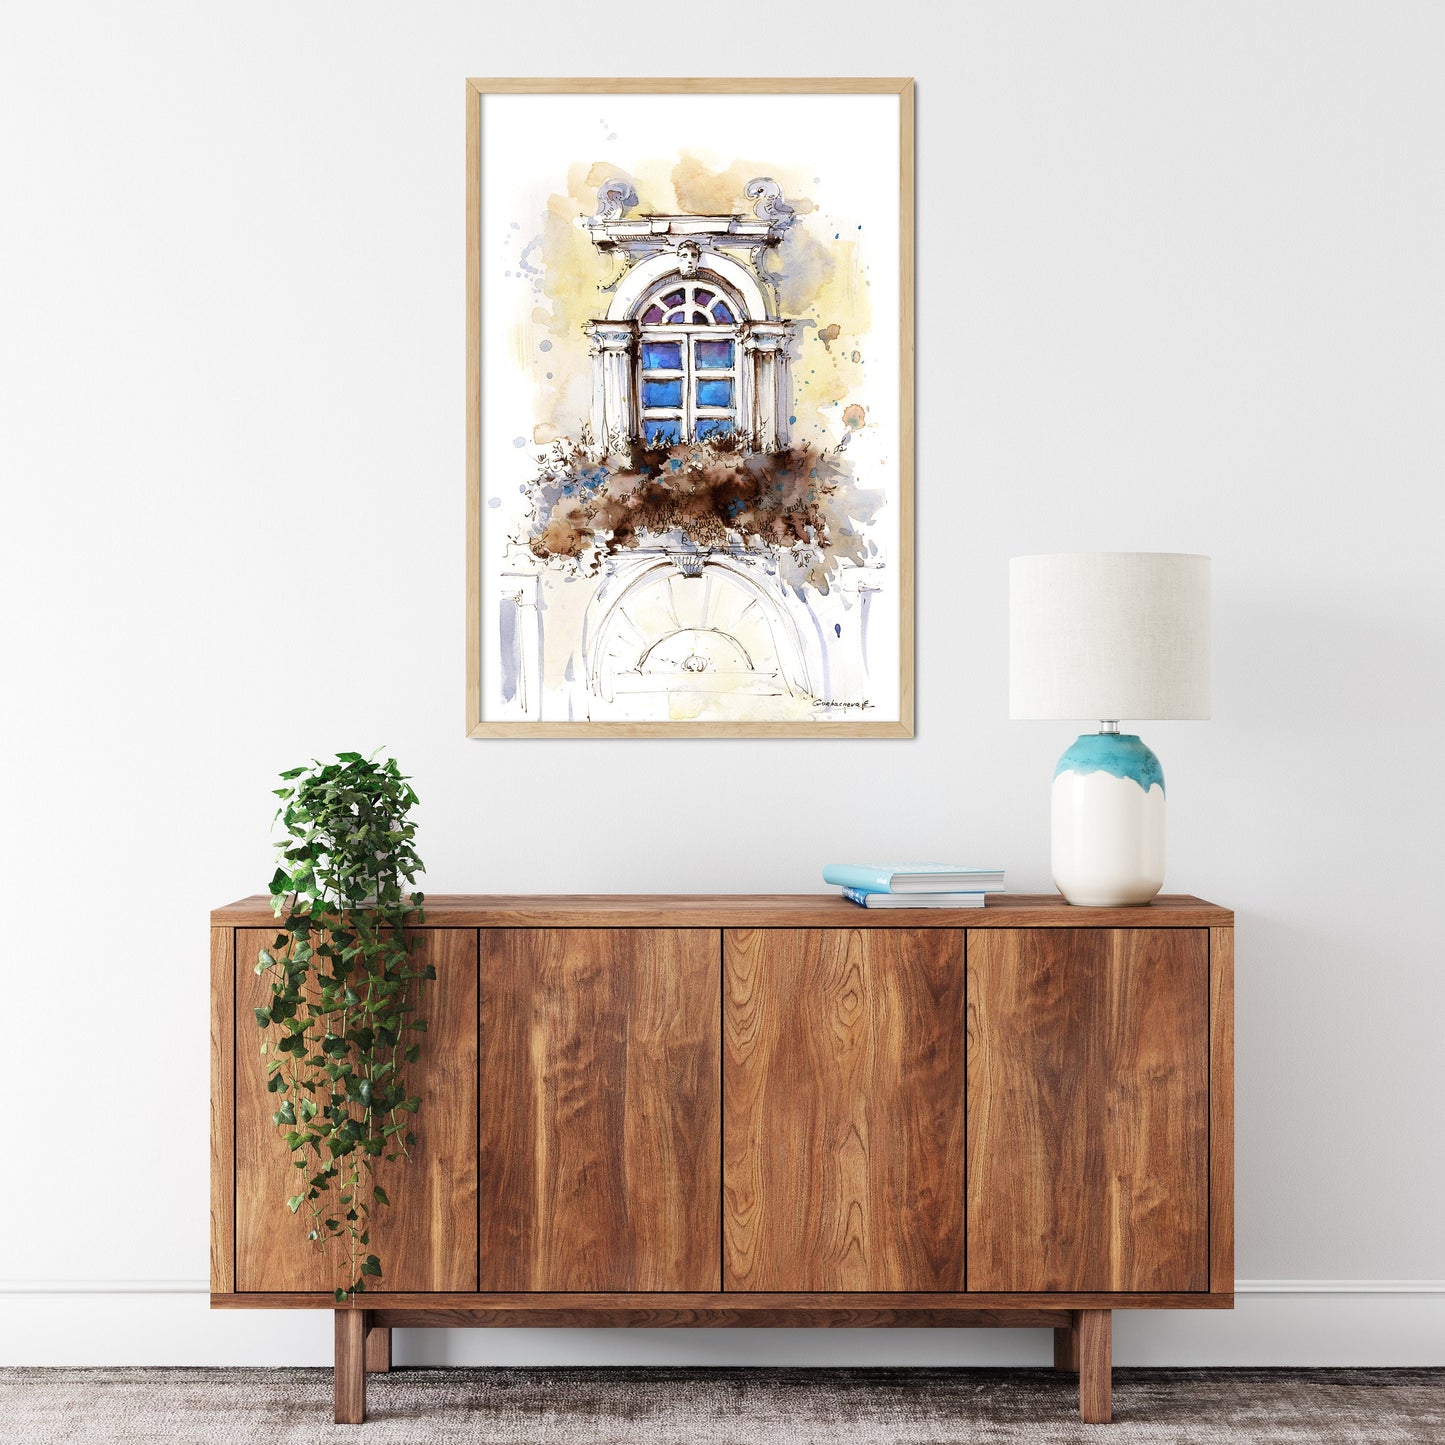 Window Art Print, Old City Scene, Watercolor Art, Architecture Painting, Travel Wall Decor